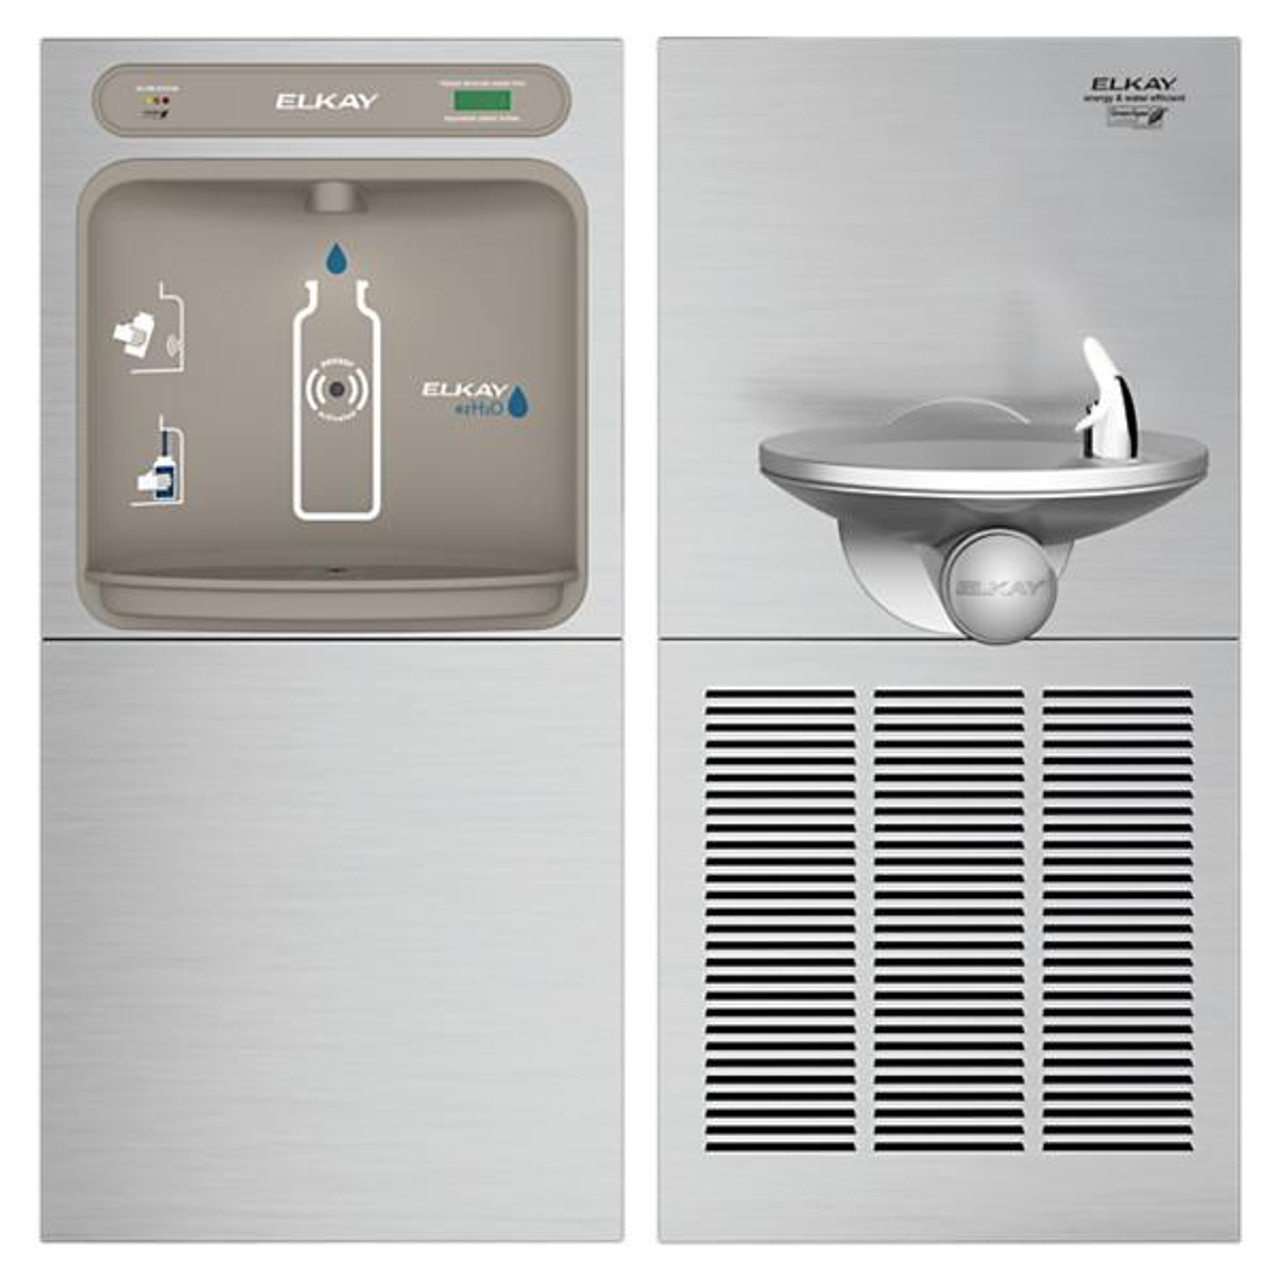 Elkay High Efficiency Wall Mount Drinking Fountain with Bottle Filler - Chicken Pieces